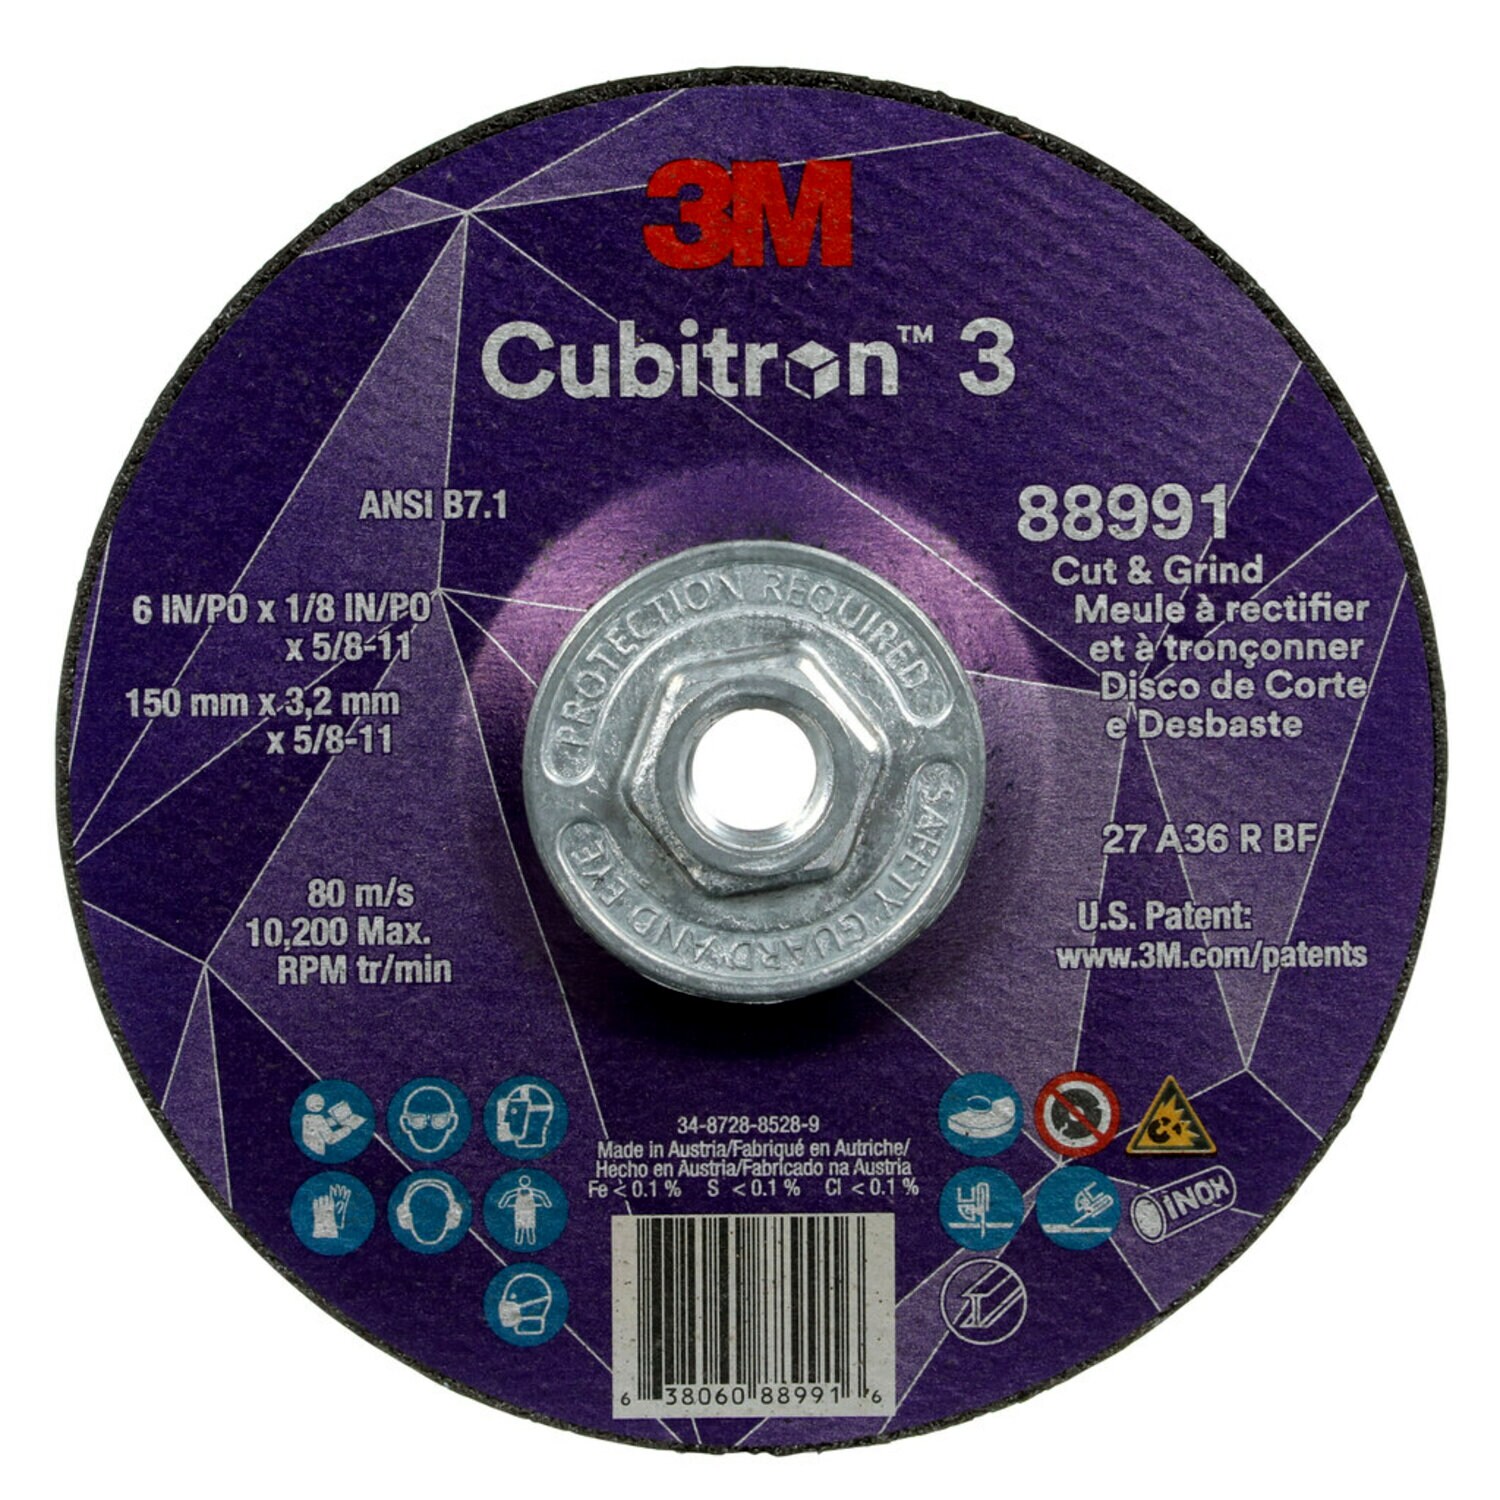 7100313205 - 3M Cubitron 3 Cut and Grind Wheel, 88991, 36+, T27, 6 in x 1/8 in x
5/8 in-11 (150 x 3.2 mm x 5/8-11 in), ANSI, 10 ea/Case